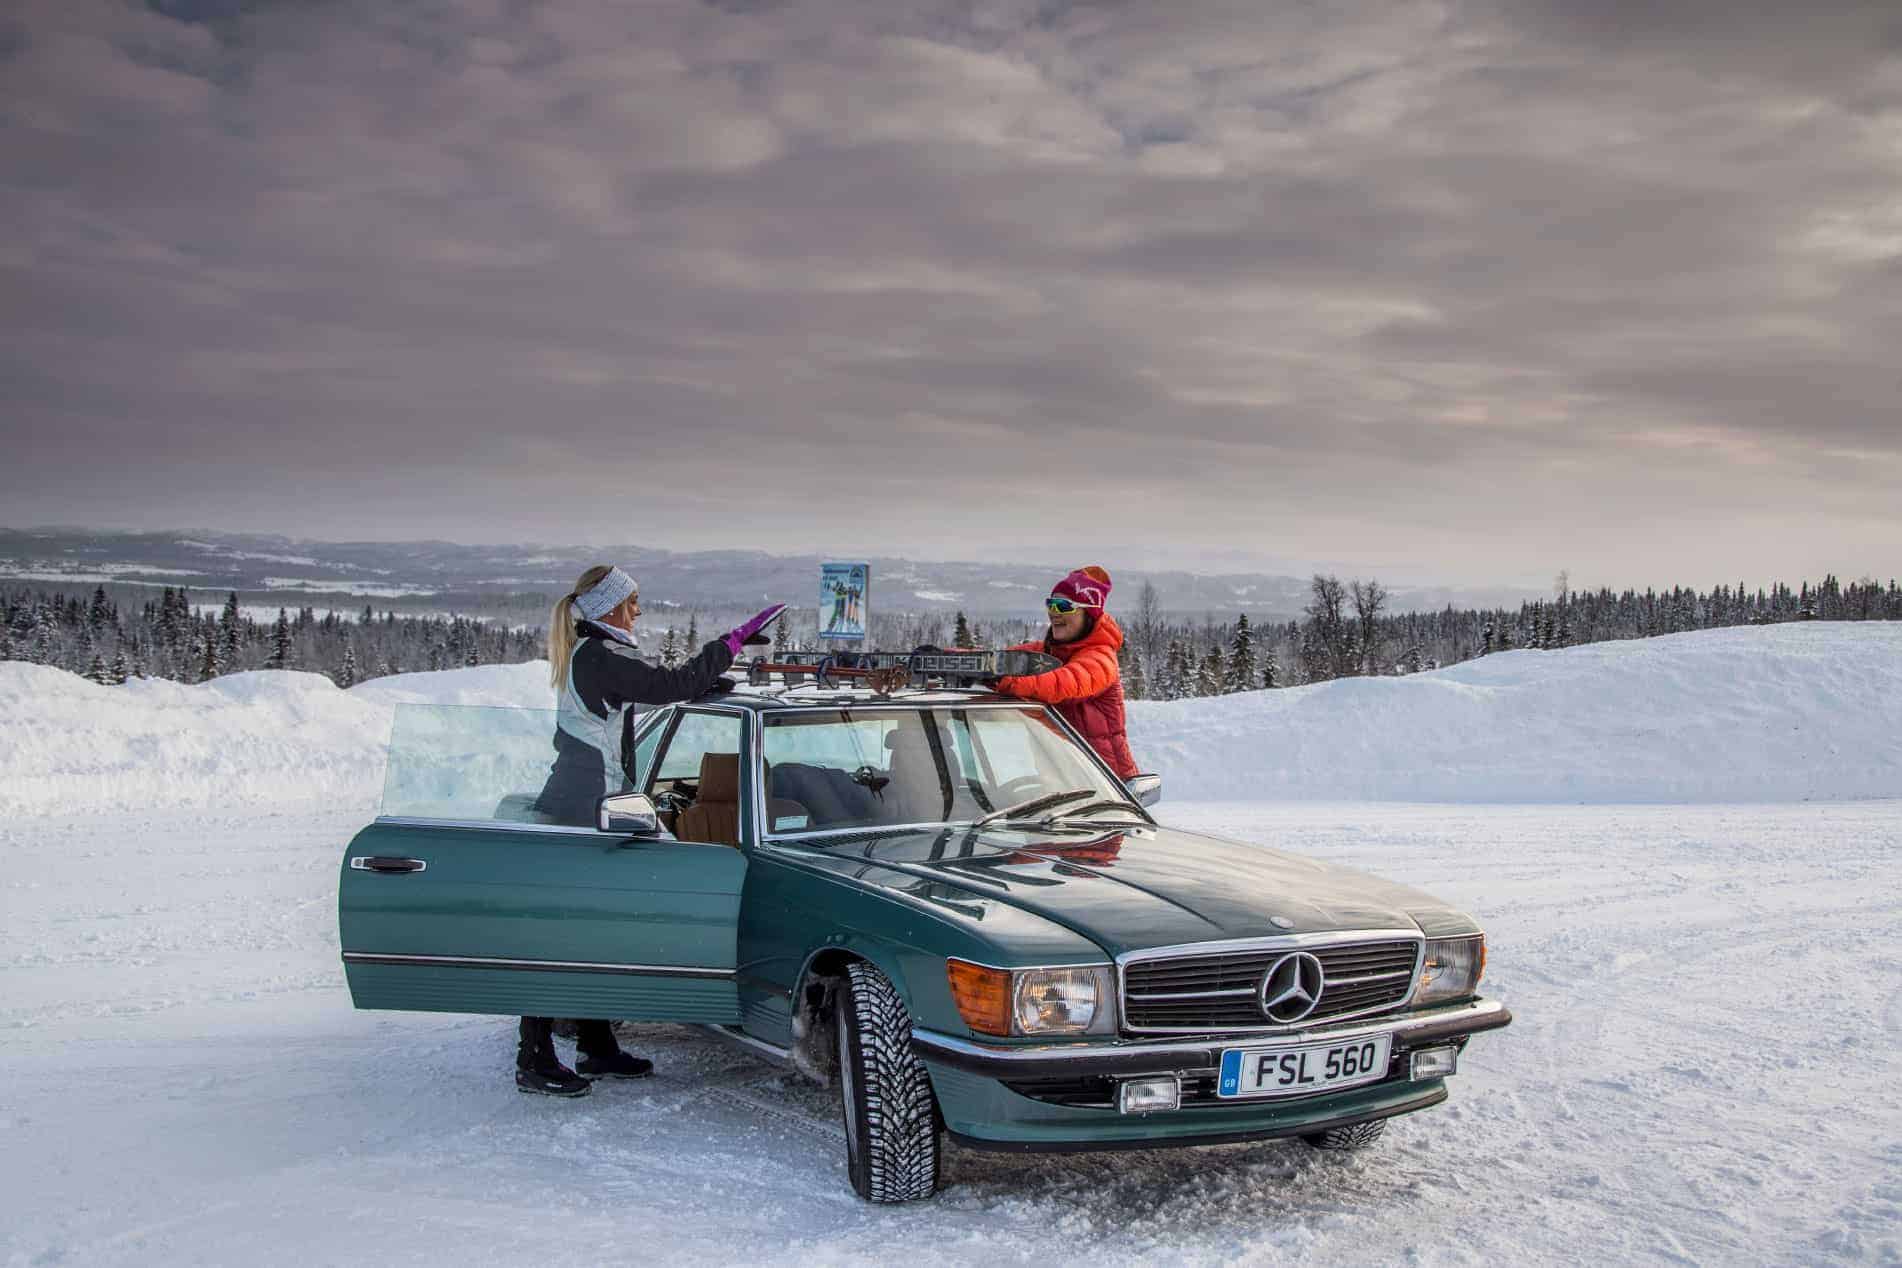 Two skiers fixing their skis to our 1980s 560SL Mercedes